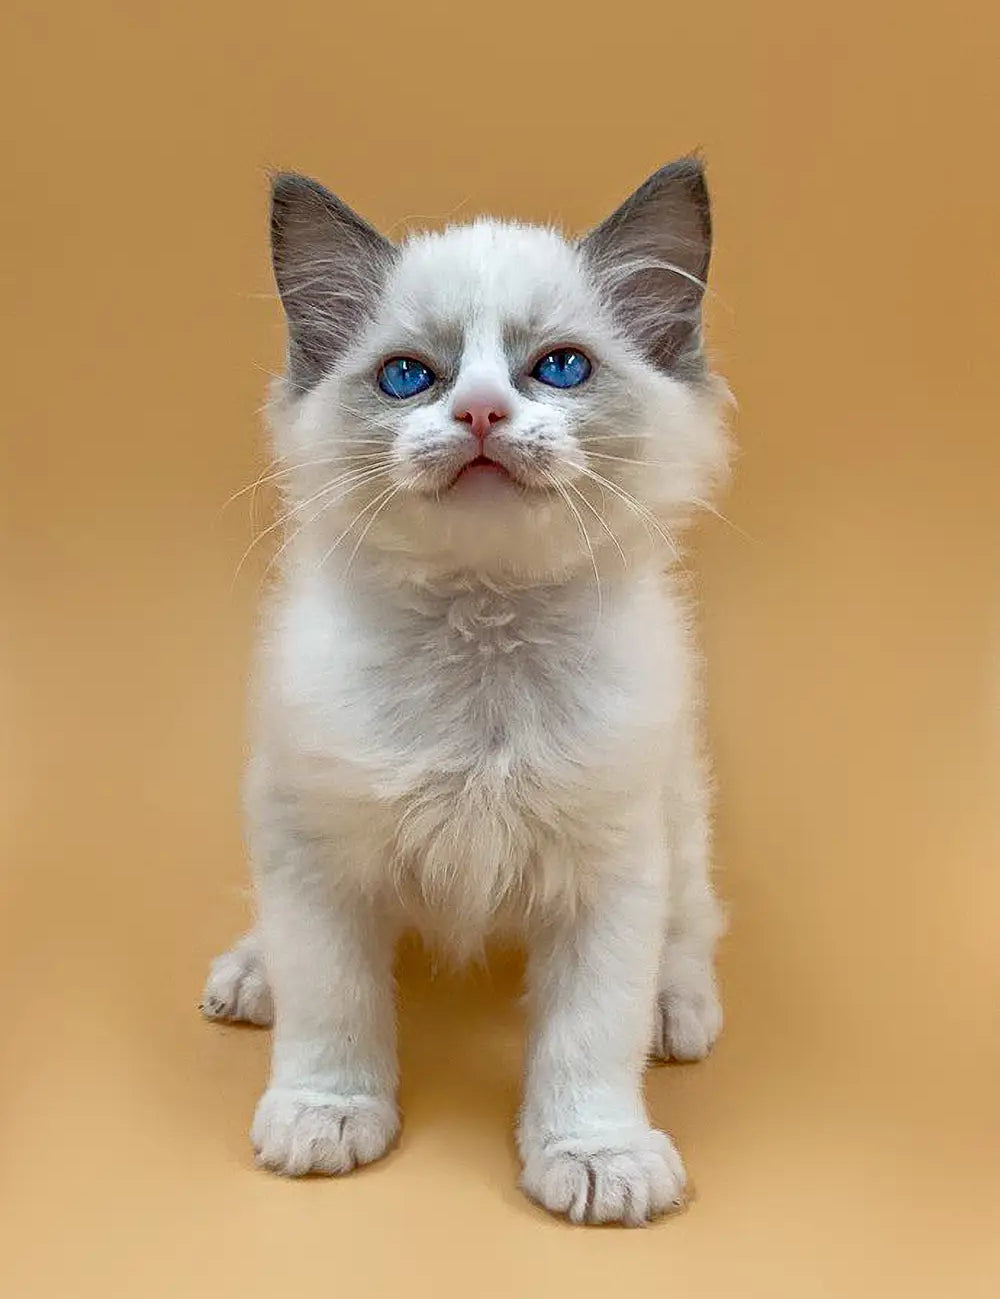 Ragdoll Cat Care: A Guide for First-Time Cat Parents